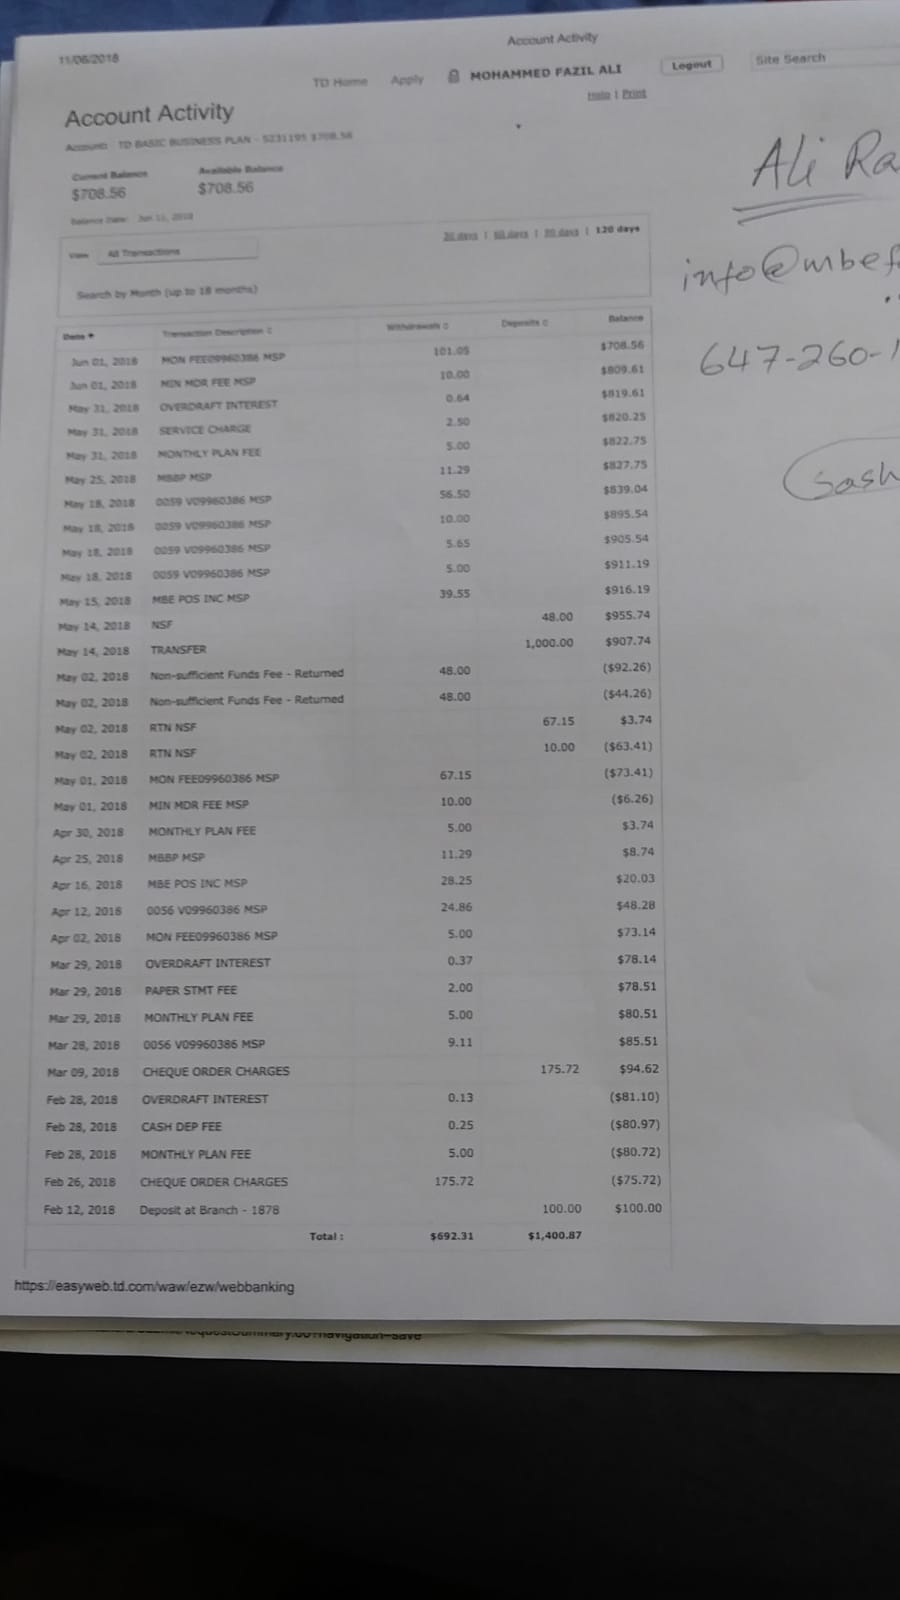 This is Bank statement copy which is a clear proof